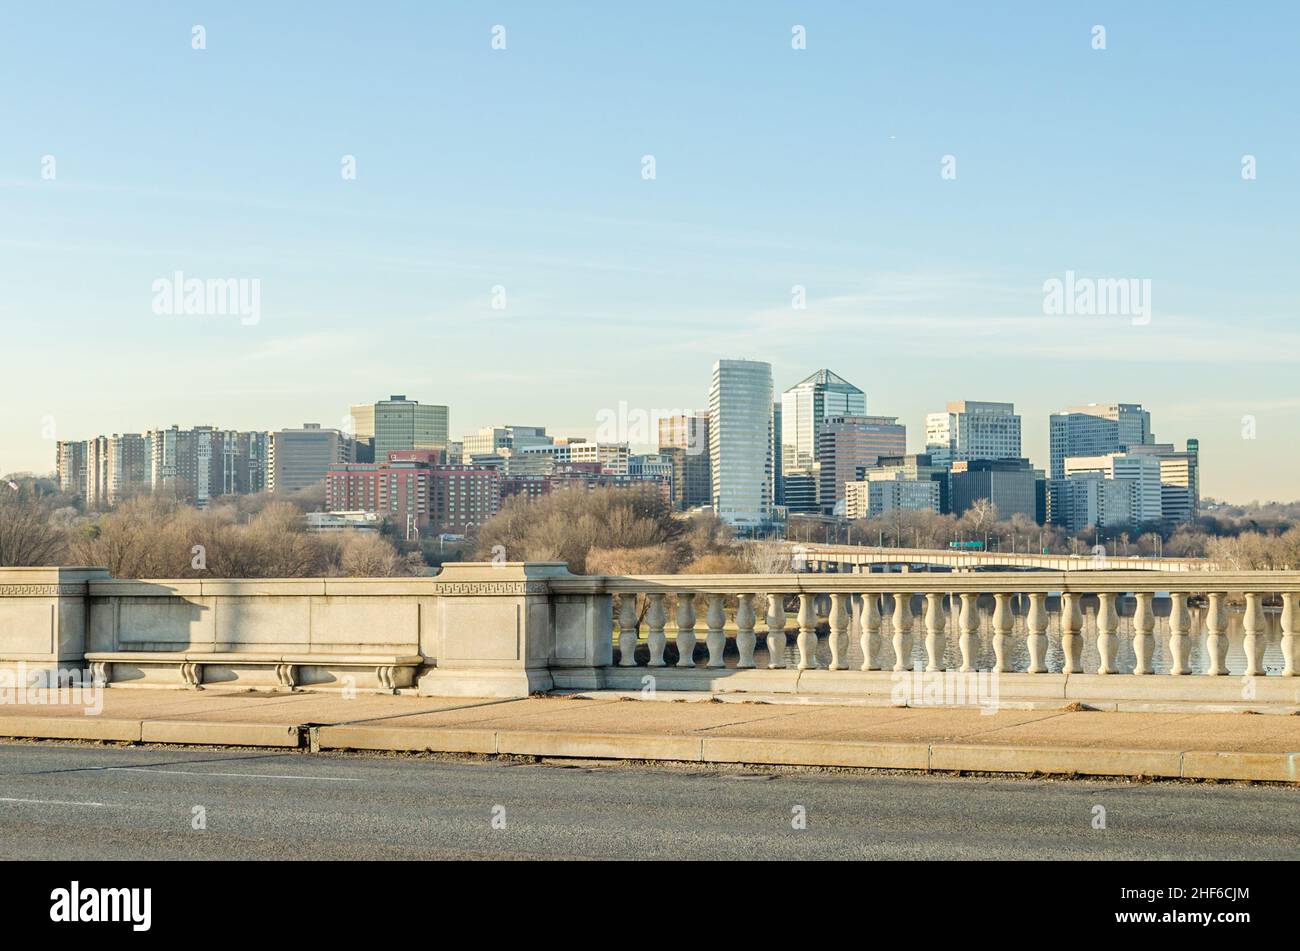 Panoramic View of Heavily Urbanized Place with Modern Buildings. Unincorporated Urban Area in Rosslyn, Arlington, Washington DC, Virginia, USA. Stock Photo